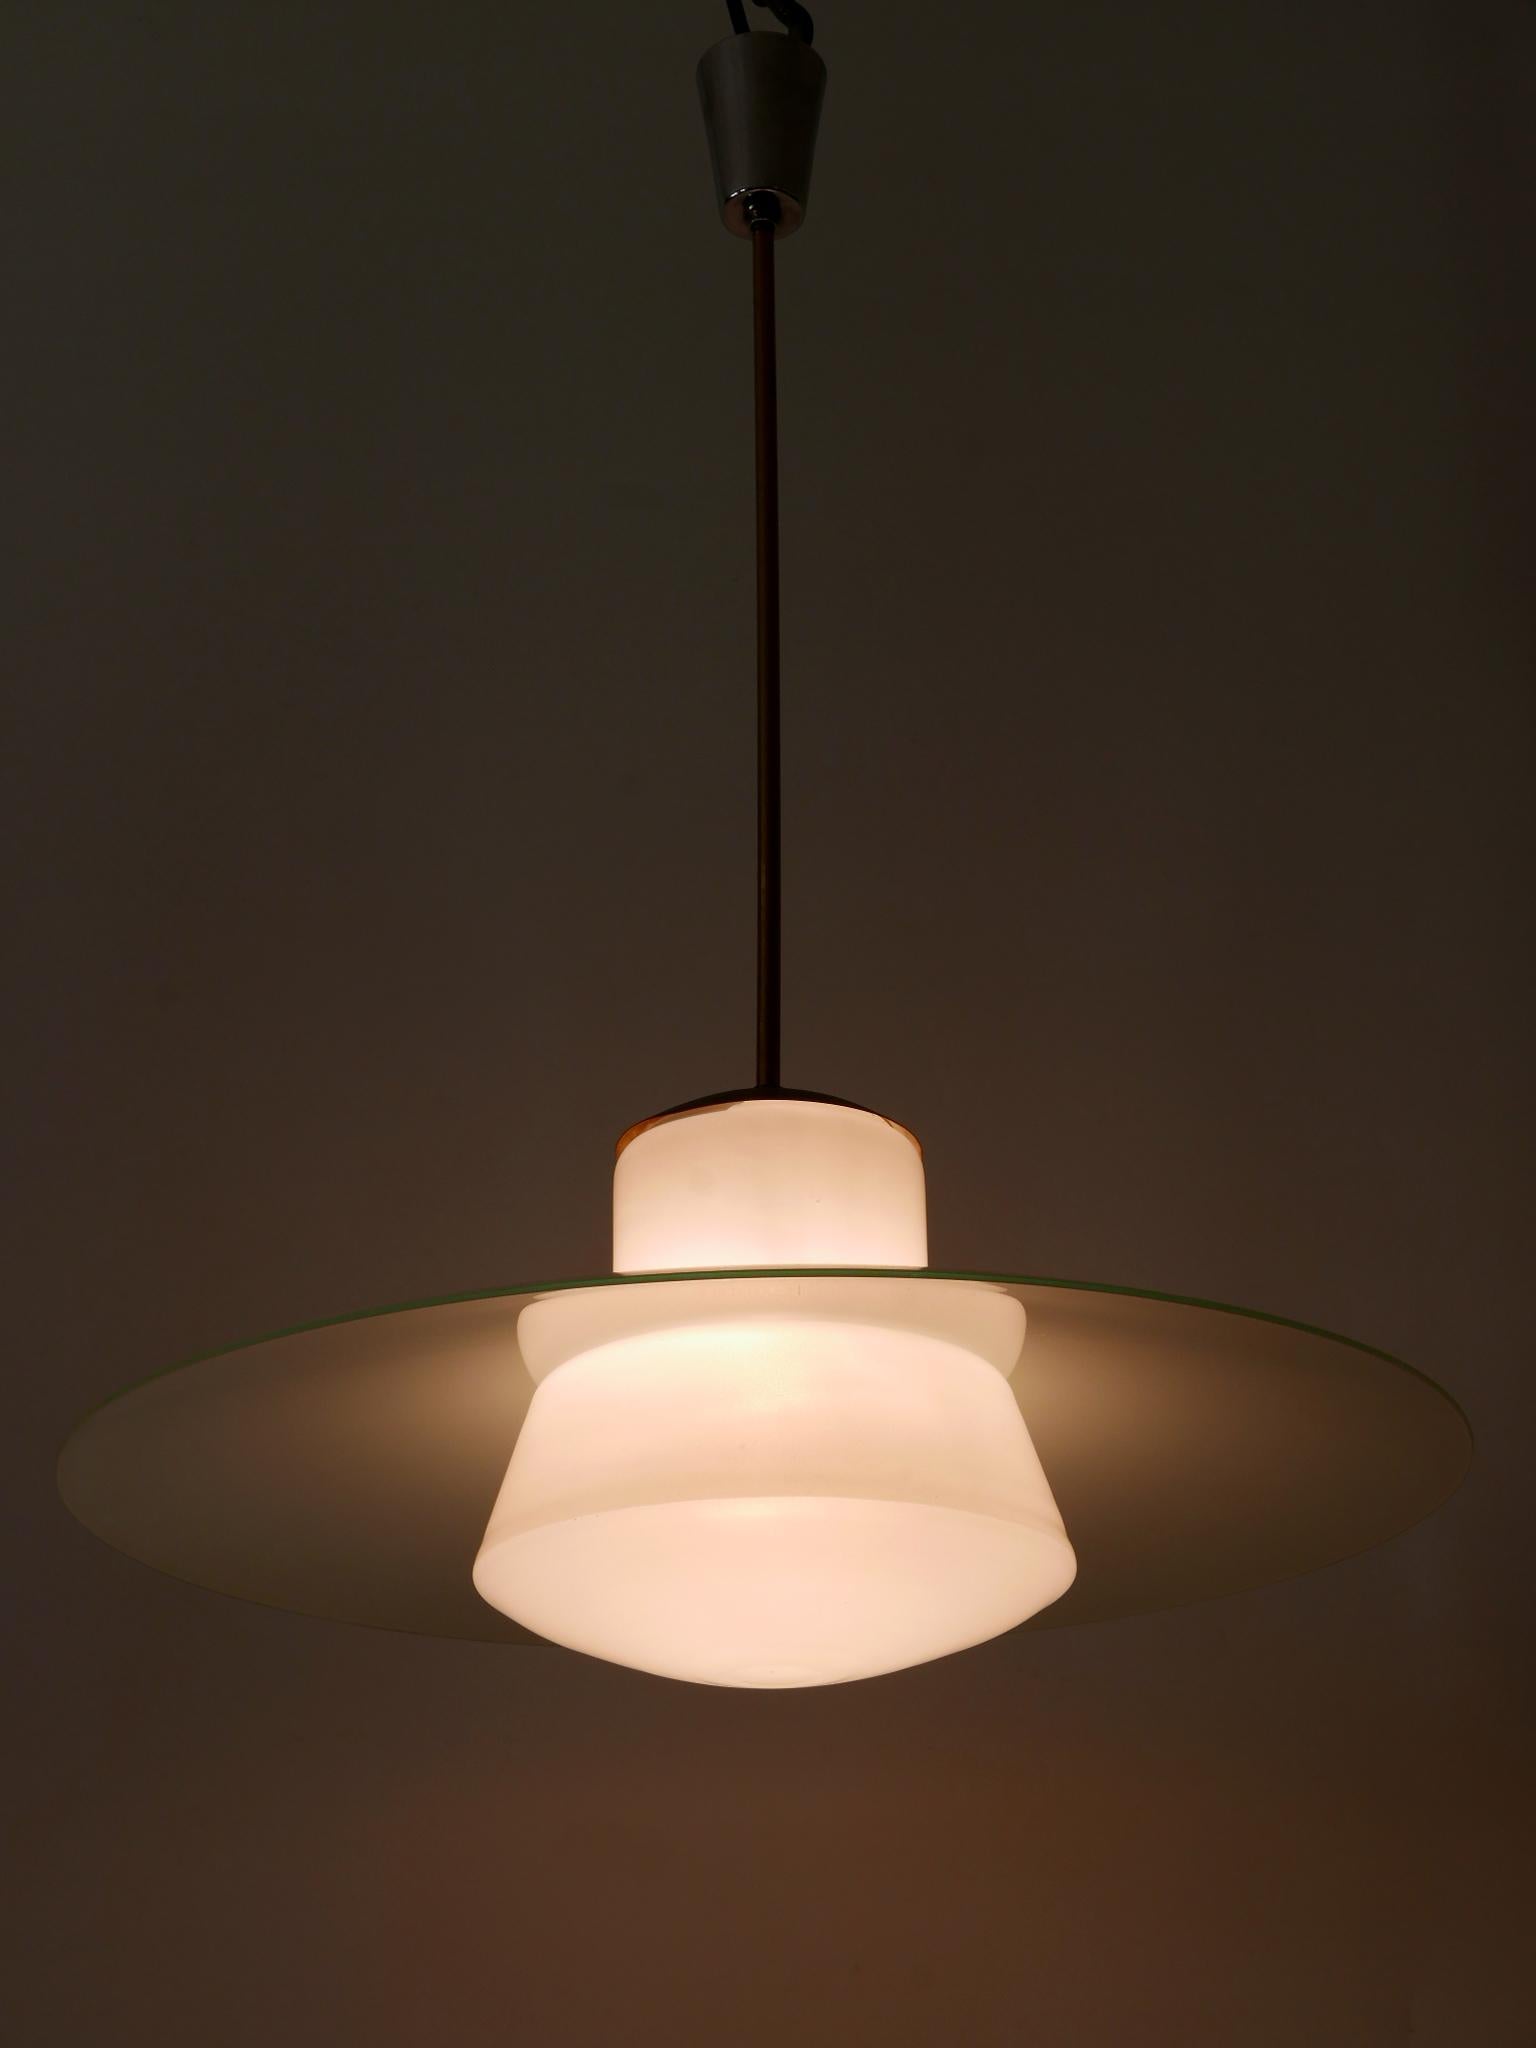 Rare Mid-Century Modern Pendant Lamp by Wolfgang Tümpel for Doria Germany 1950s In Good Condition For Sale In Munich, DE